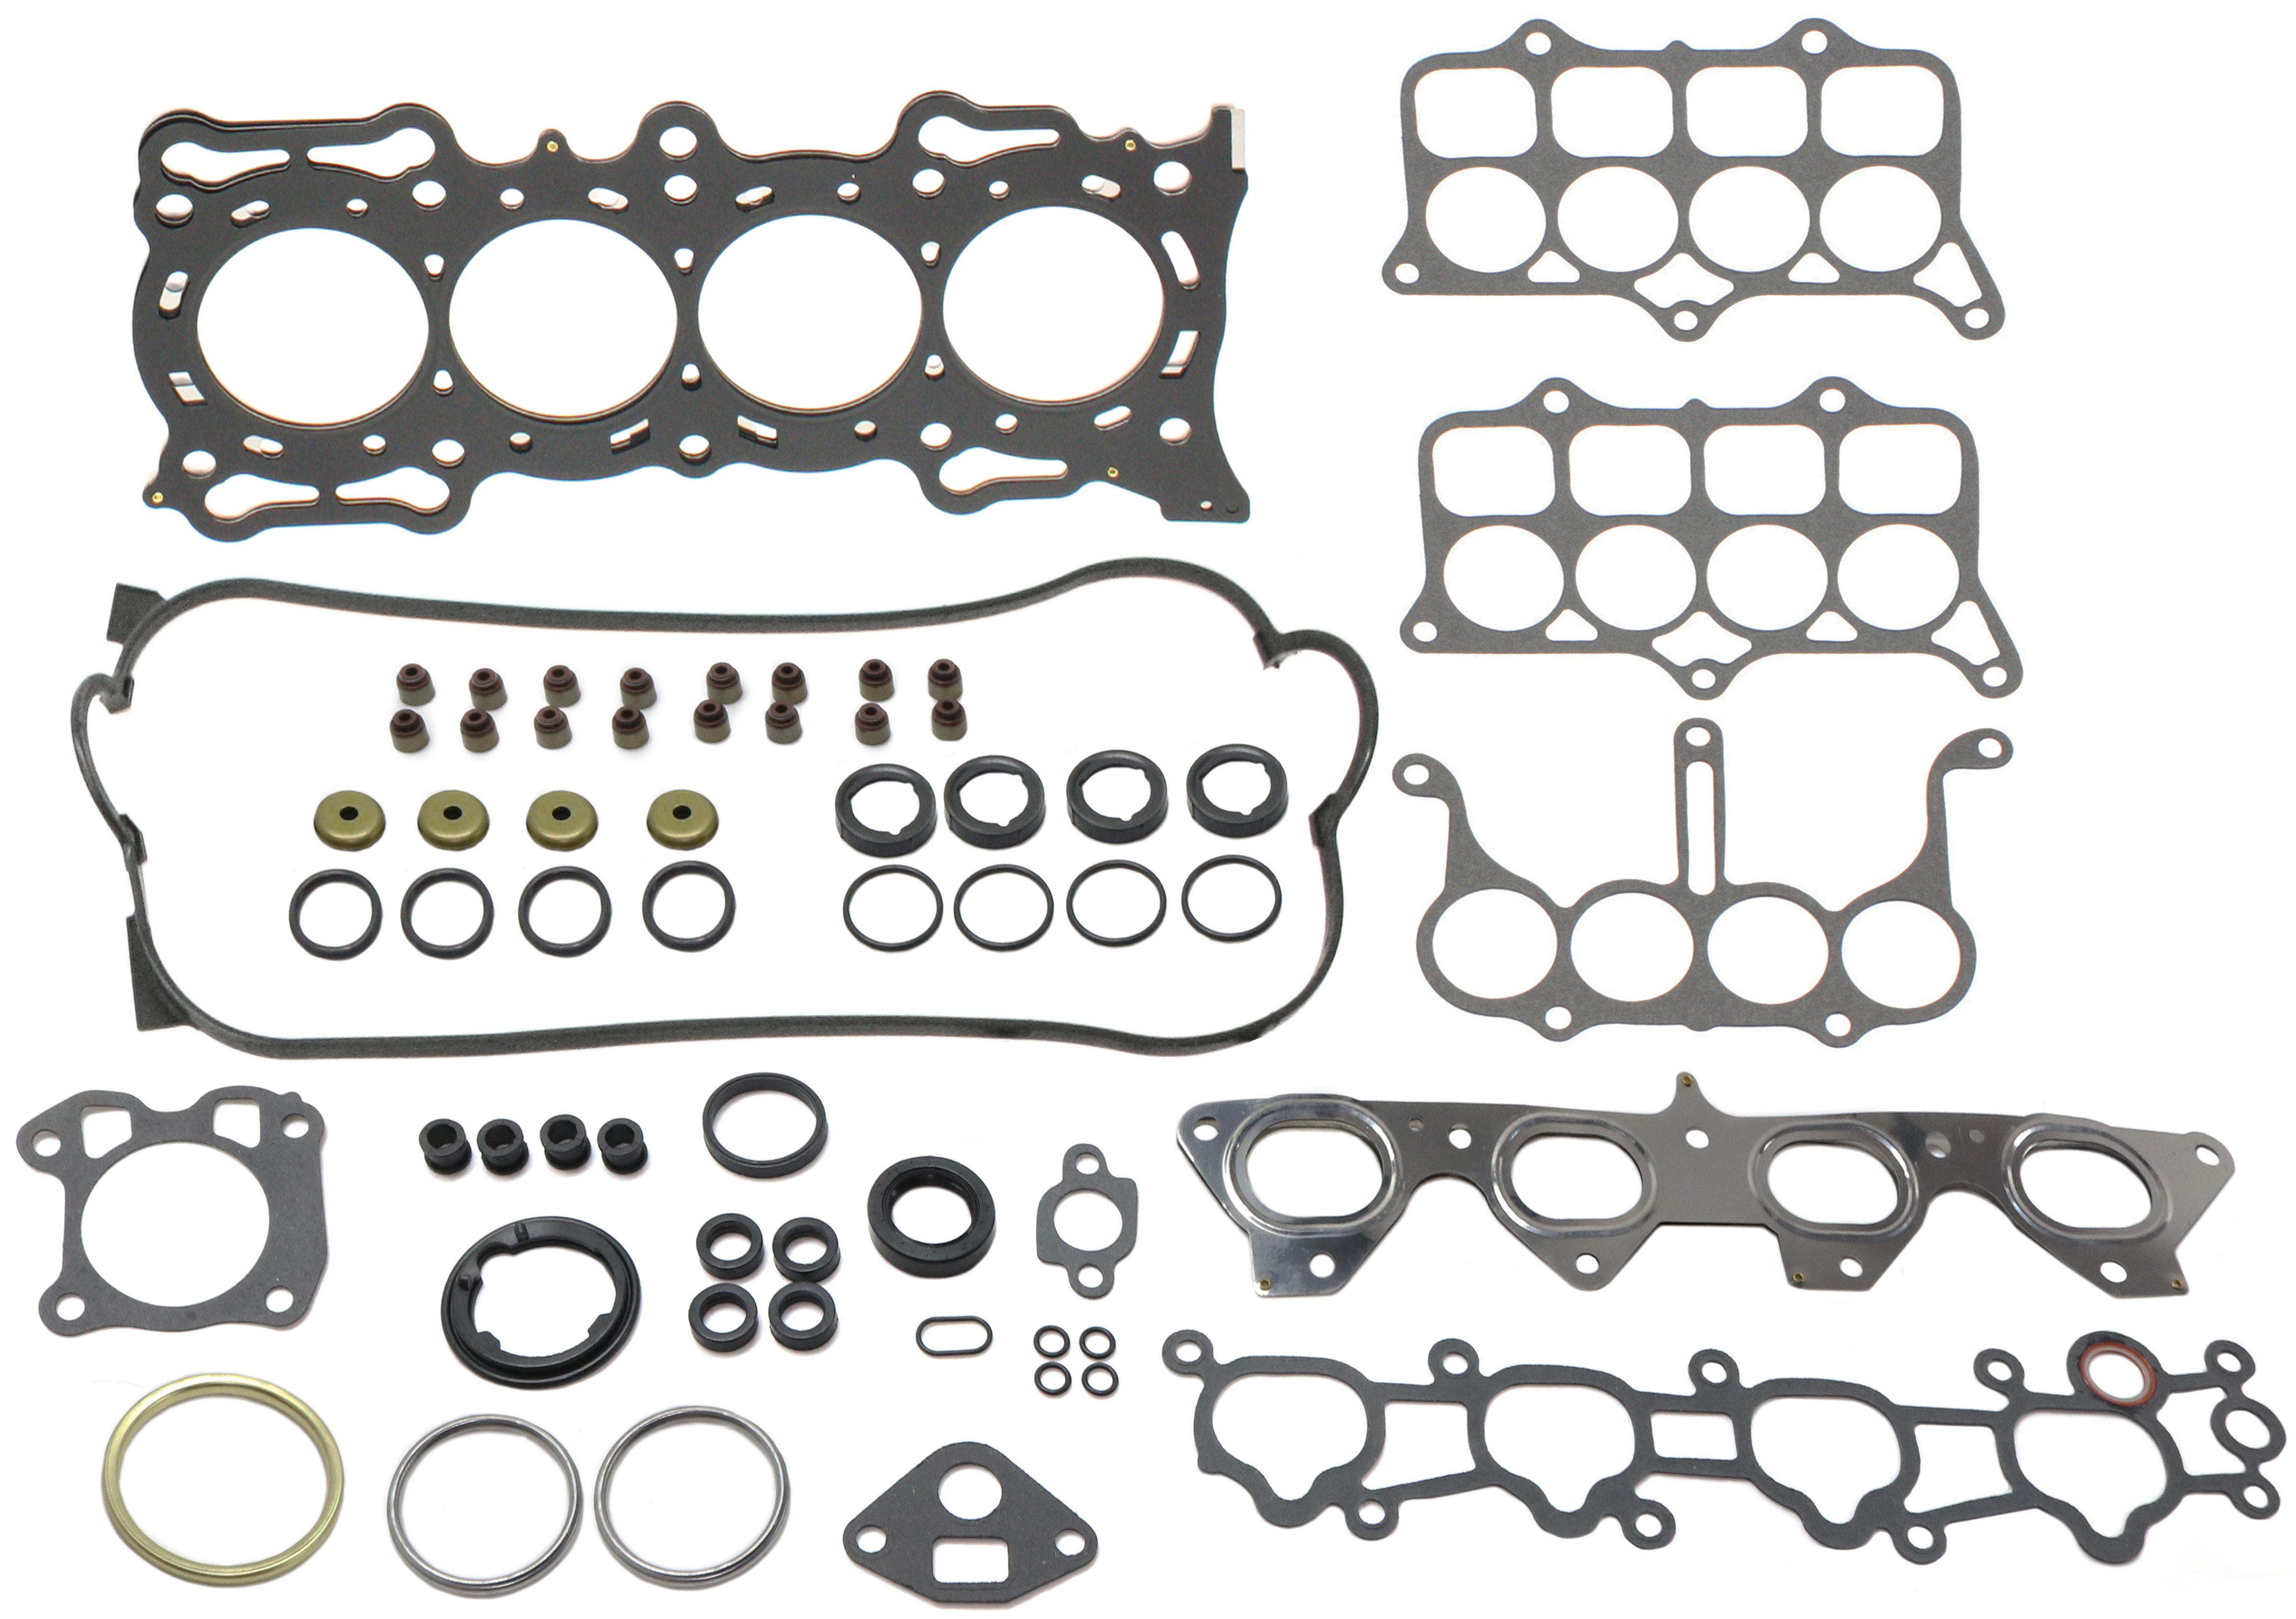 Head Gasket Set Compatible with 1990-1993 Honda Accord 1992-1996 Prelude  4Cyl 2.2L